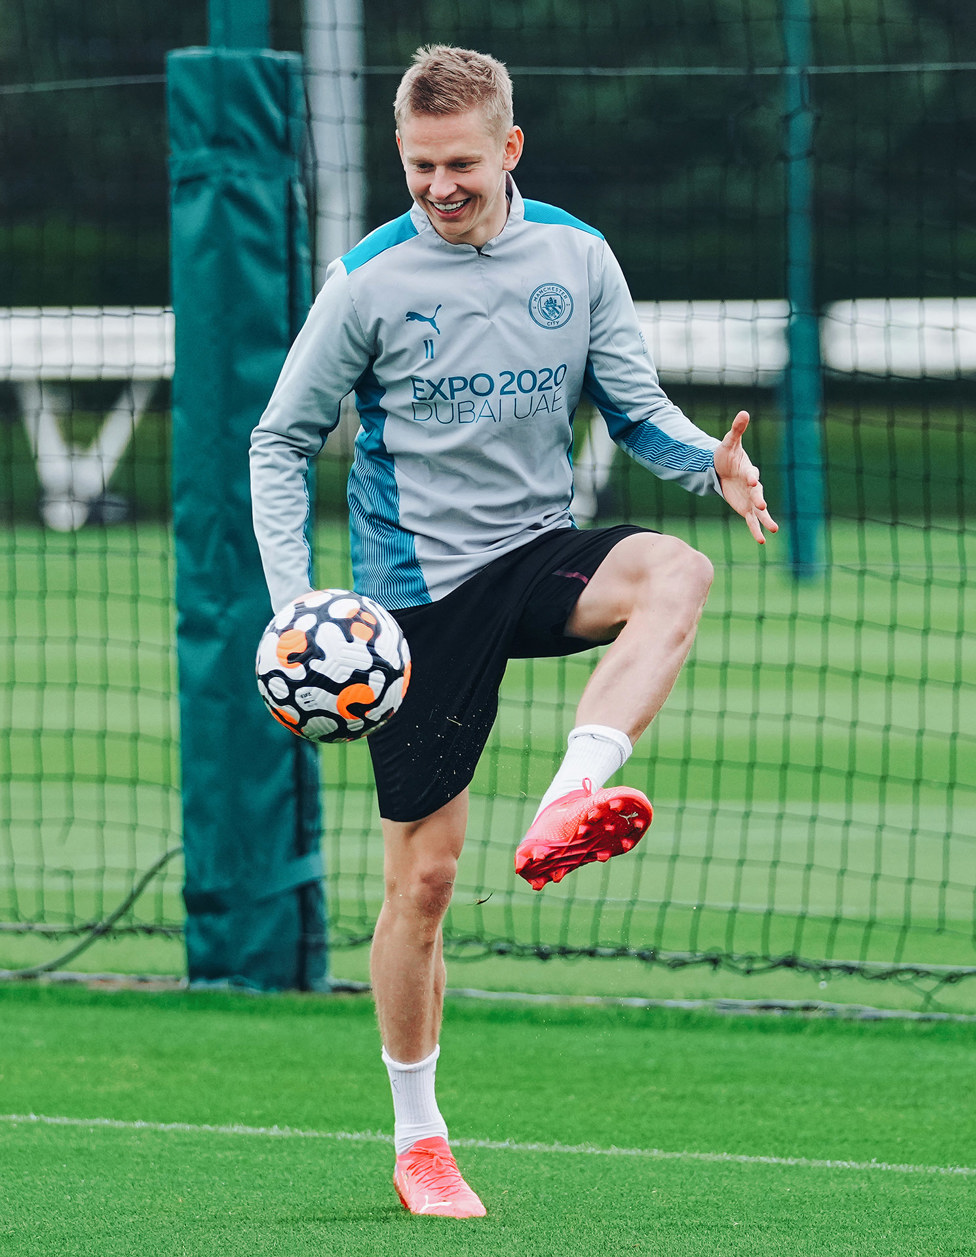 EYES ON THE PRIZE : Oleks Zinchenko shows some close control